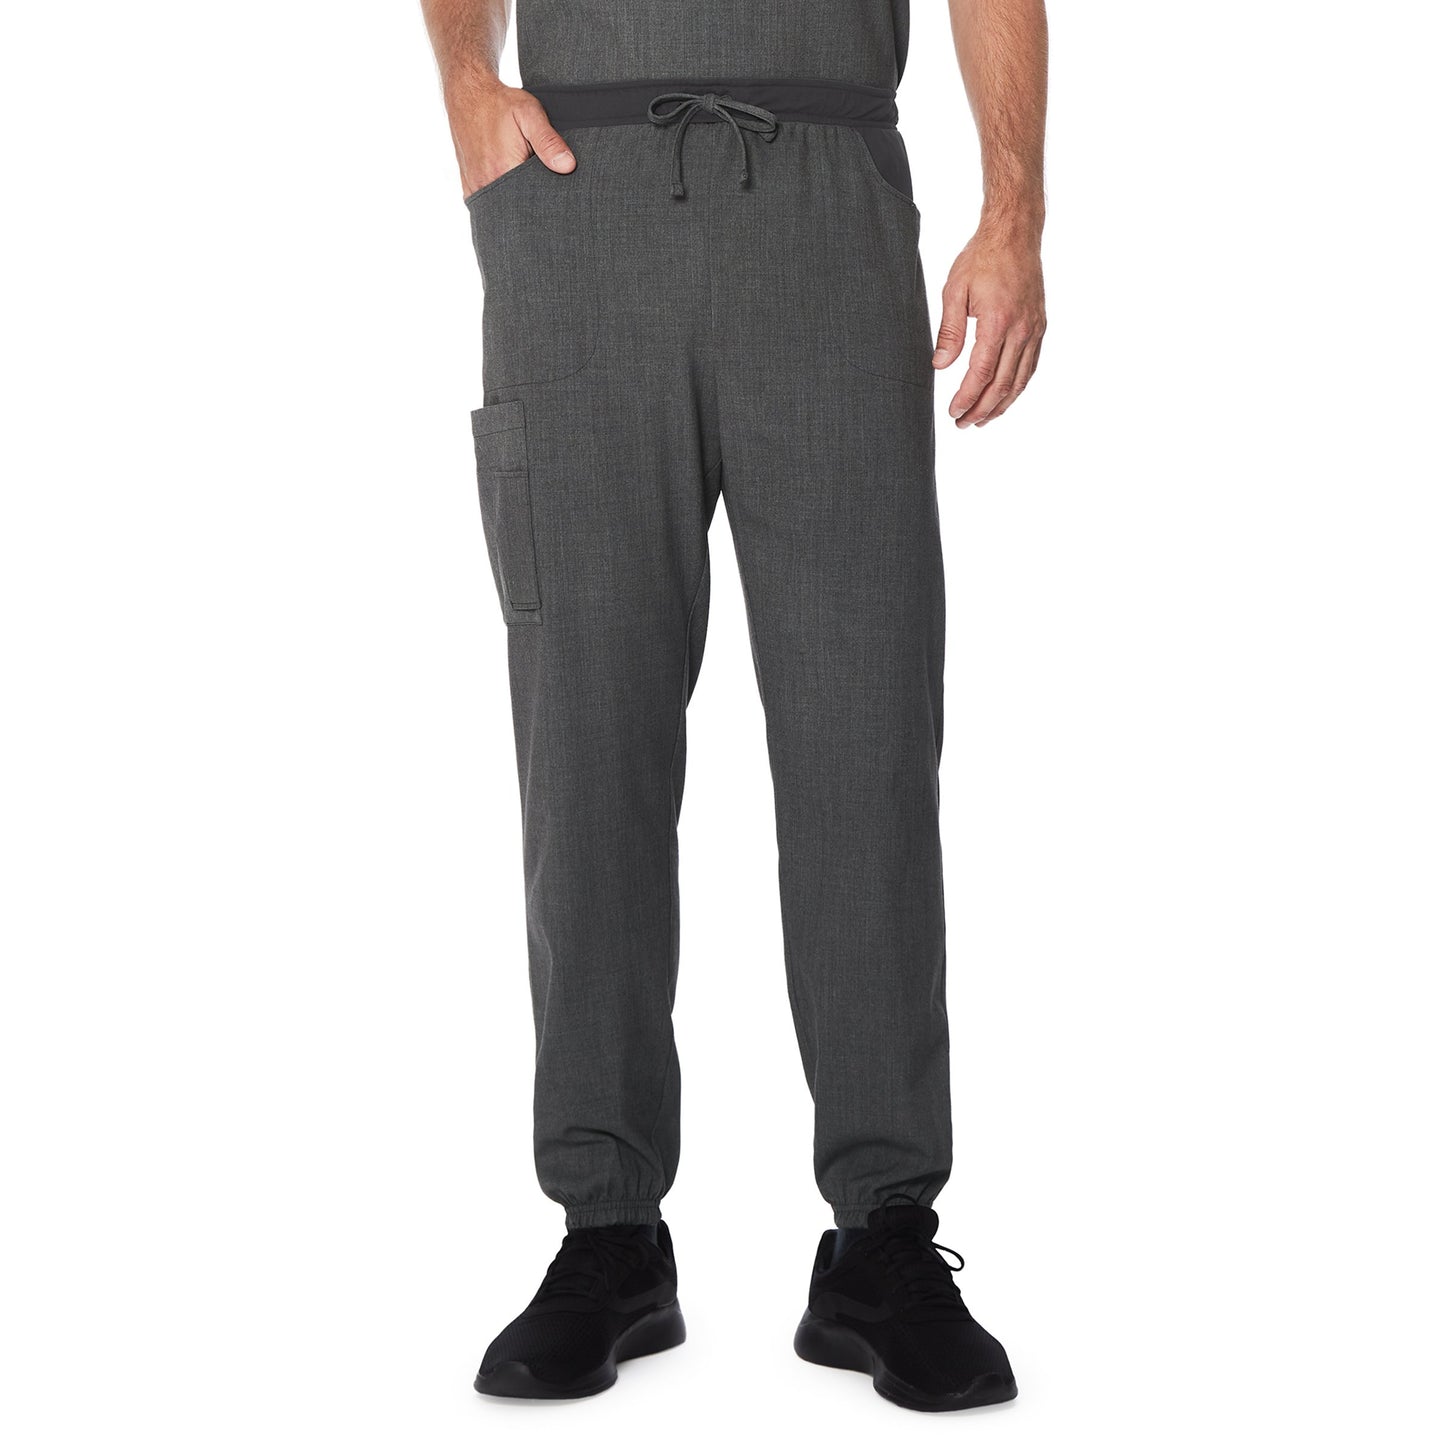 Charcoal Heather;Model is wearing size M. He is 6'2", Waist 32", Inseam 32".@A man wearing a charcoal heather scrub jogger pant.